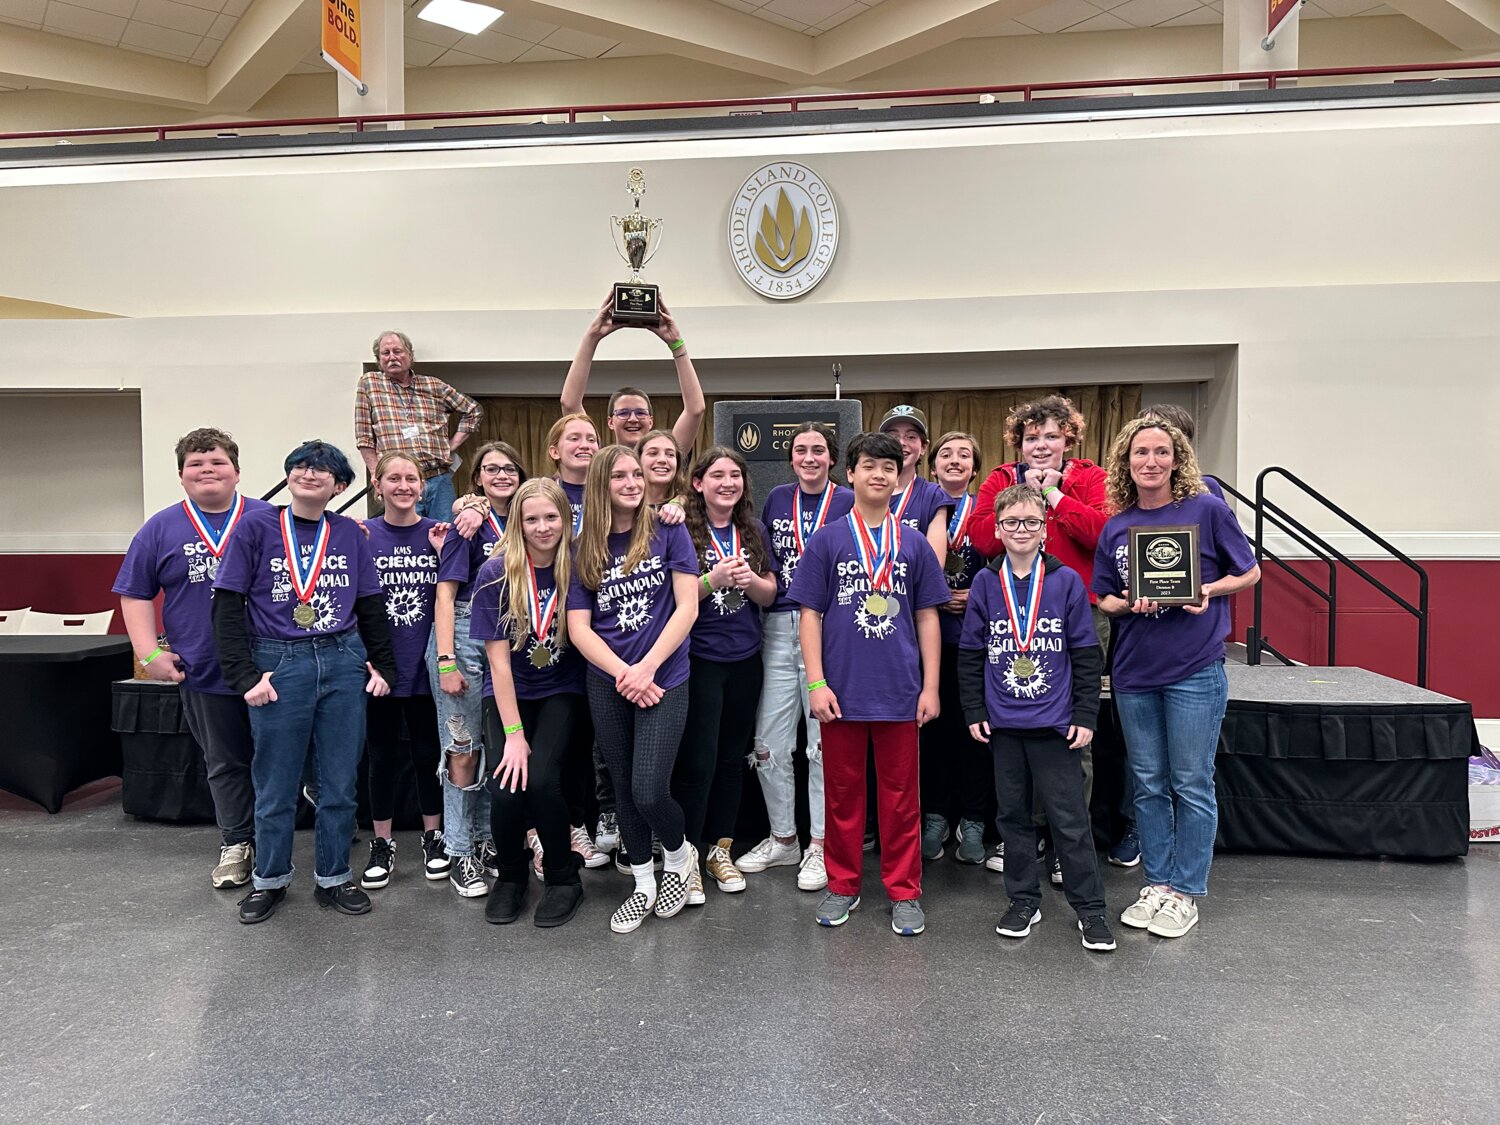 The KMS Science Olympiad team is going to the National competition for the first time. The team amassed 11 medals during the recent state competition in April.